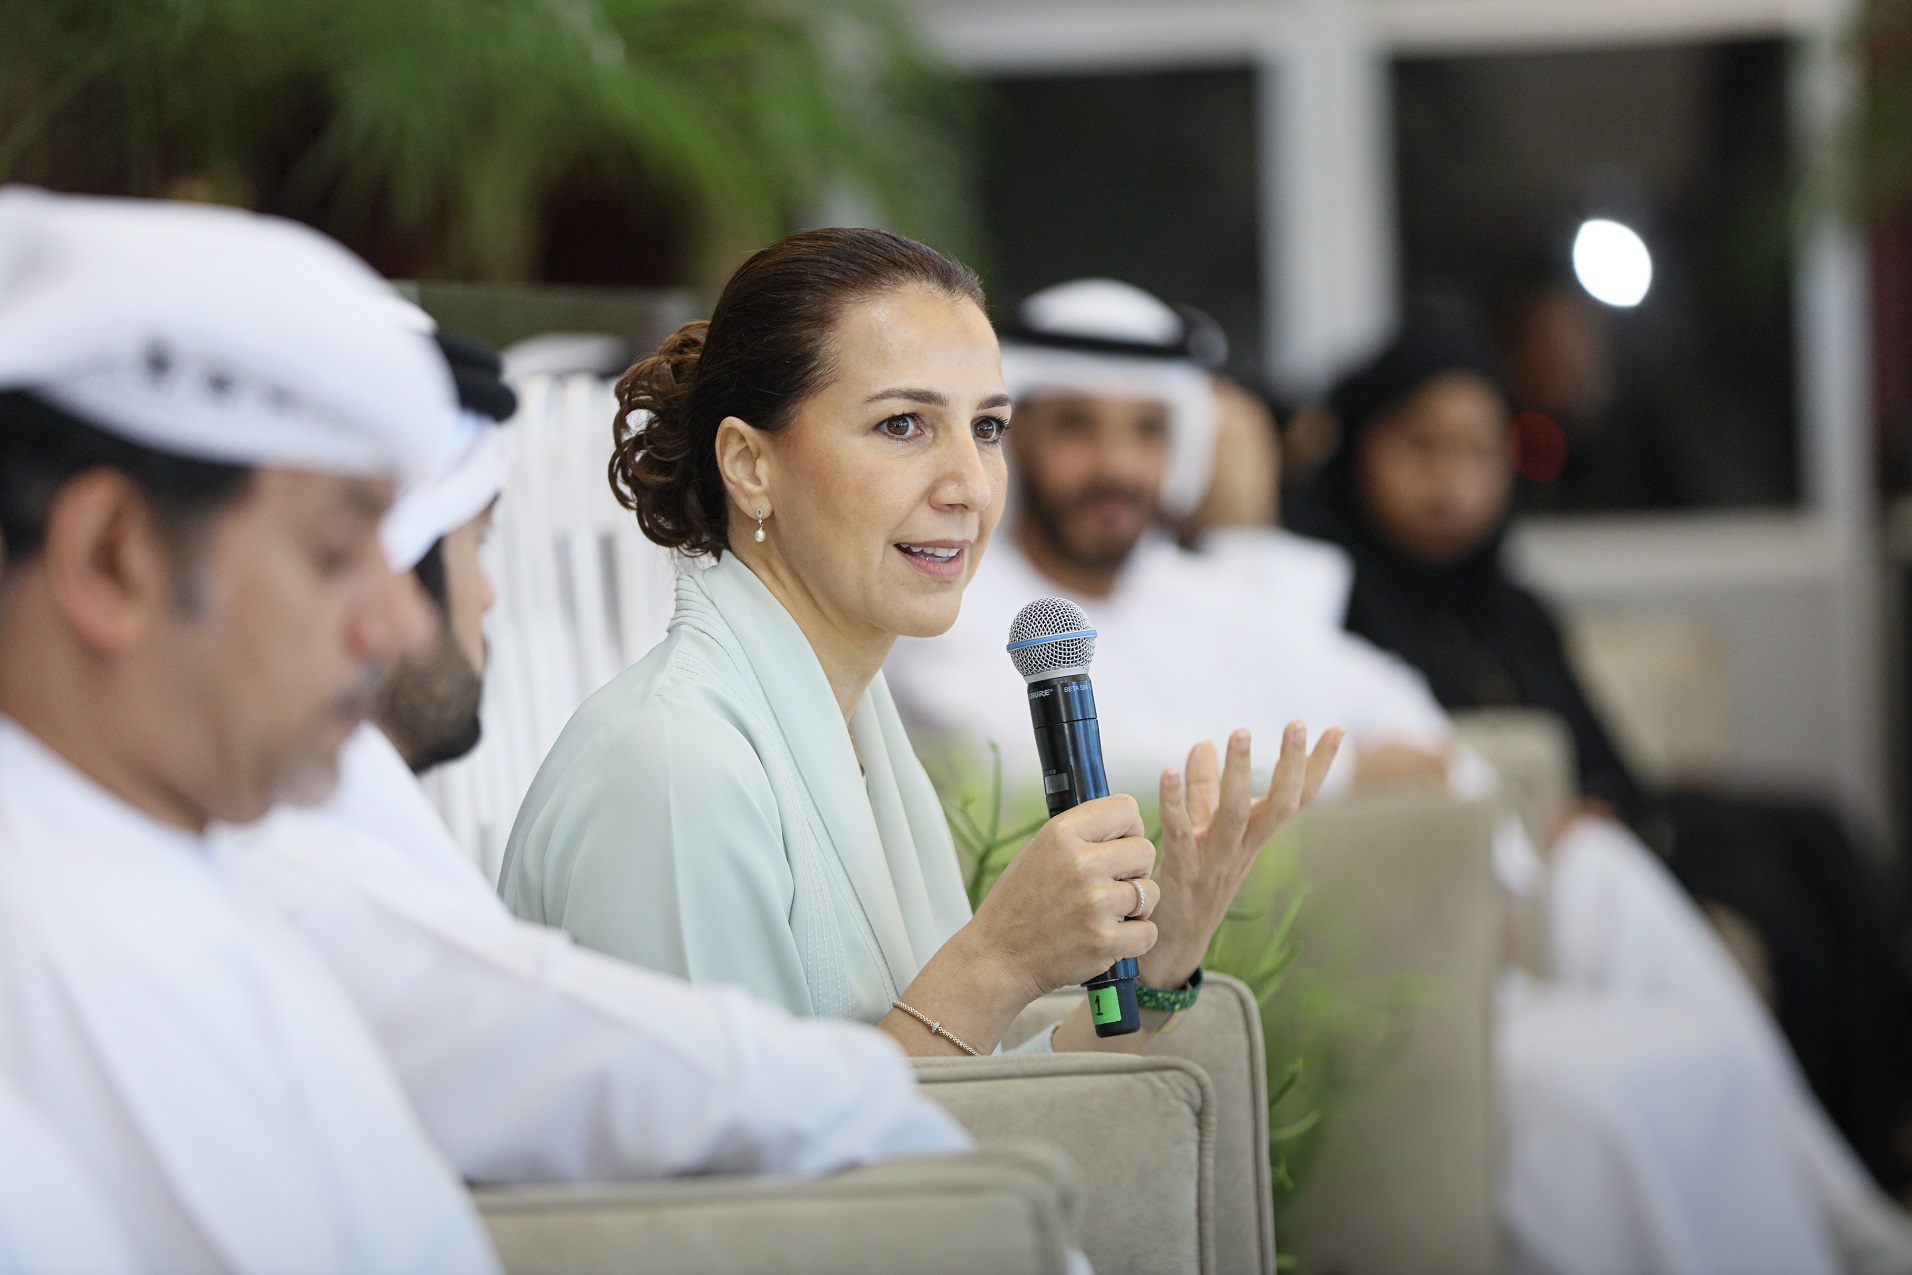 Maryam Al Muhairi calls on climate experts to promote “nature-based solutions” to tackle climate change